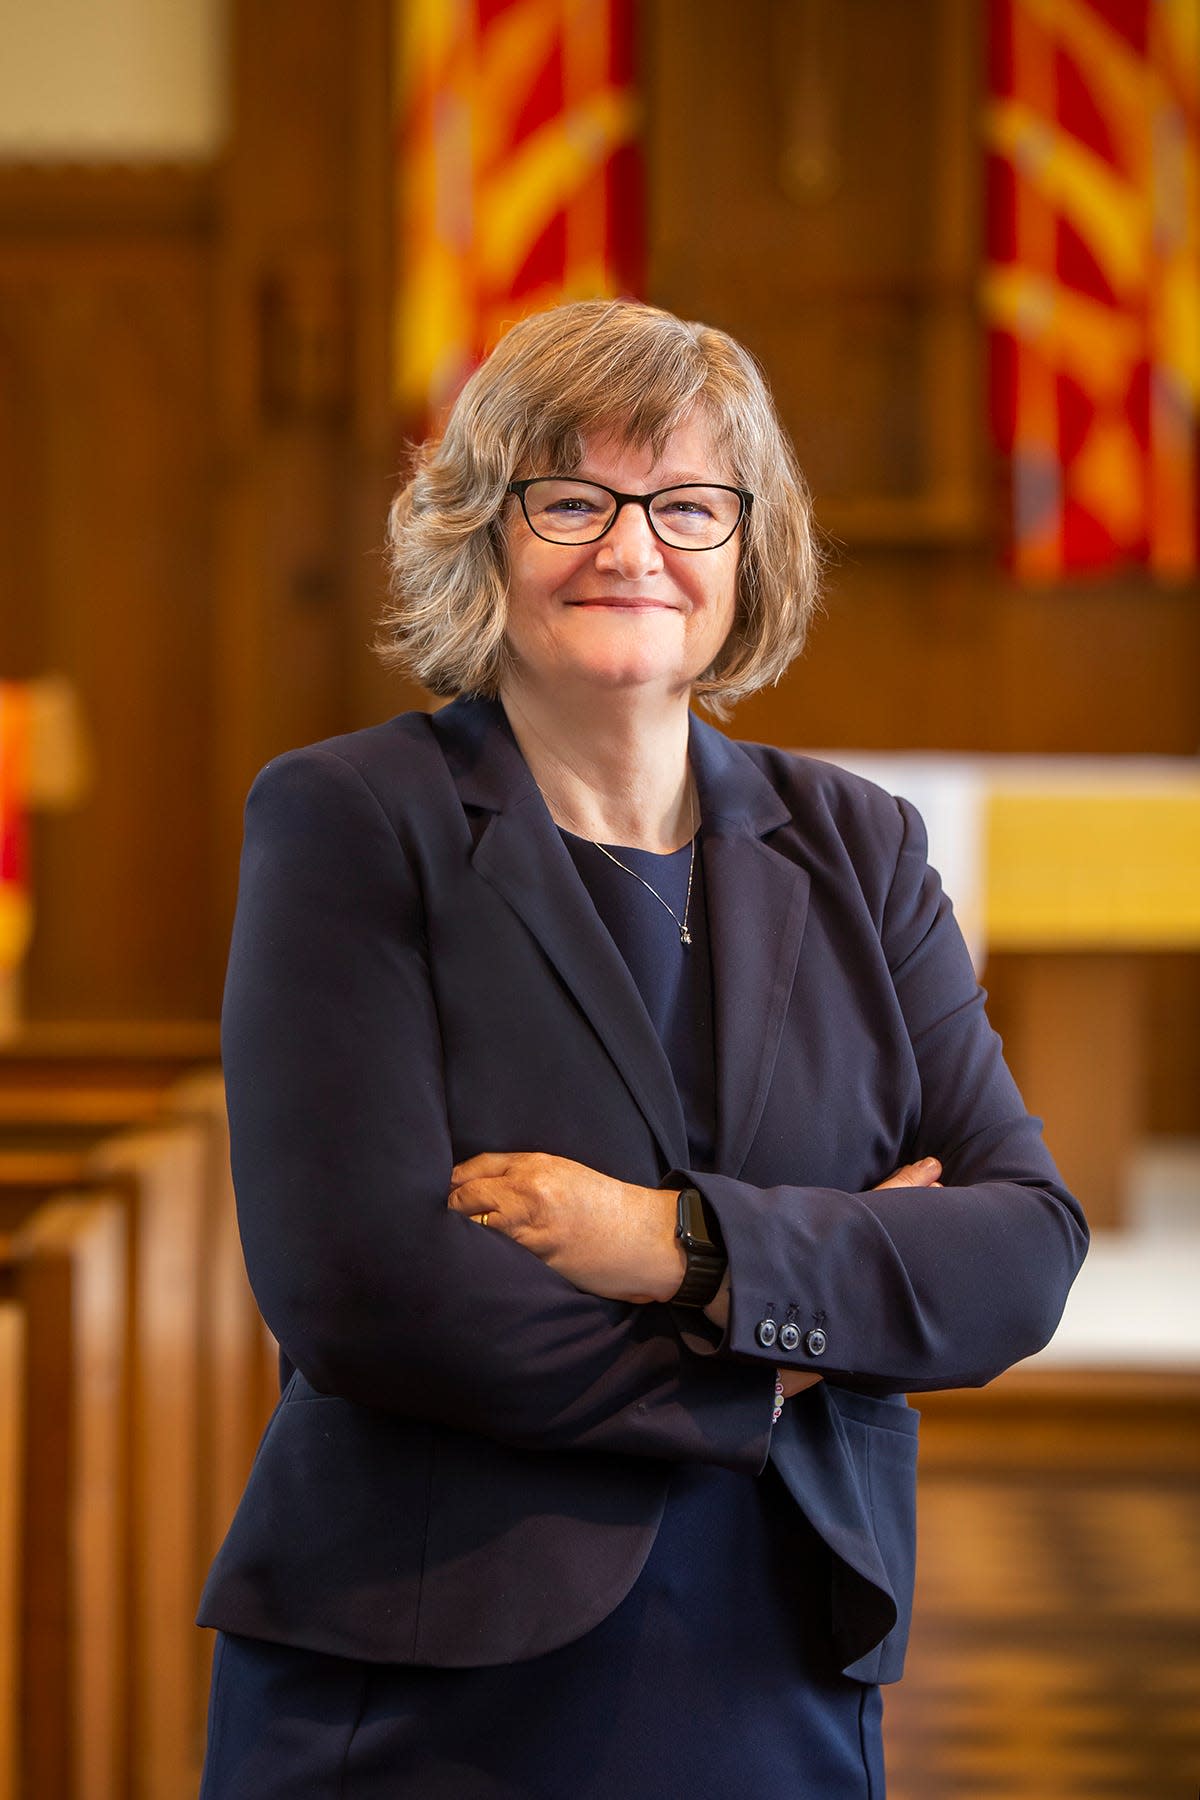 Isabelle Cherney was named Mount Mary University's 13th president Thursday. She will start the role July 1.